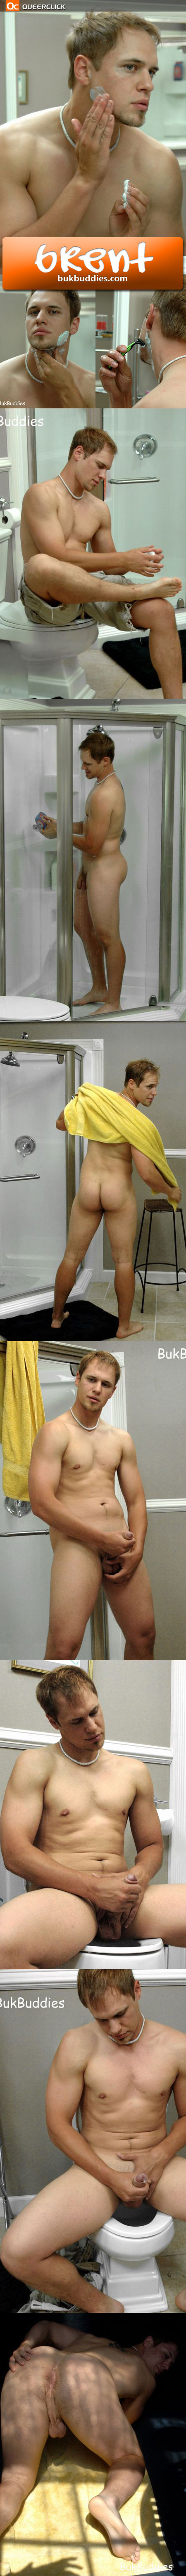 Rise and Shine with Brent at BukBuddies.com